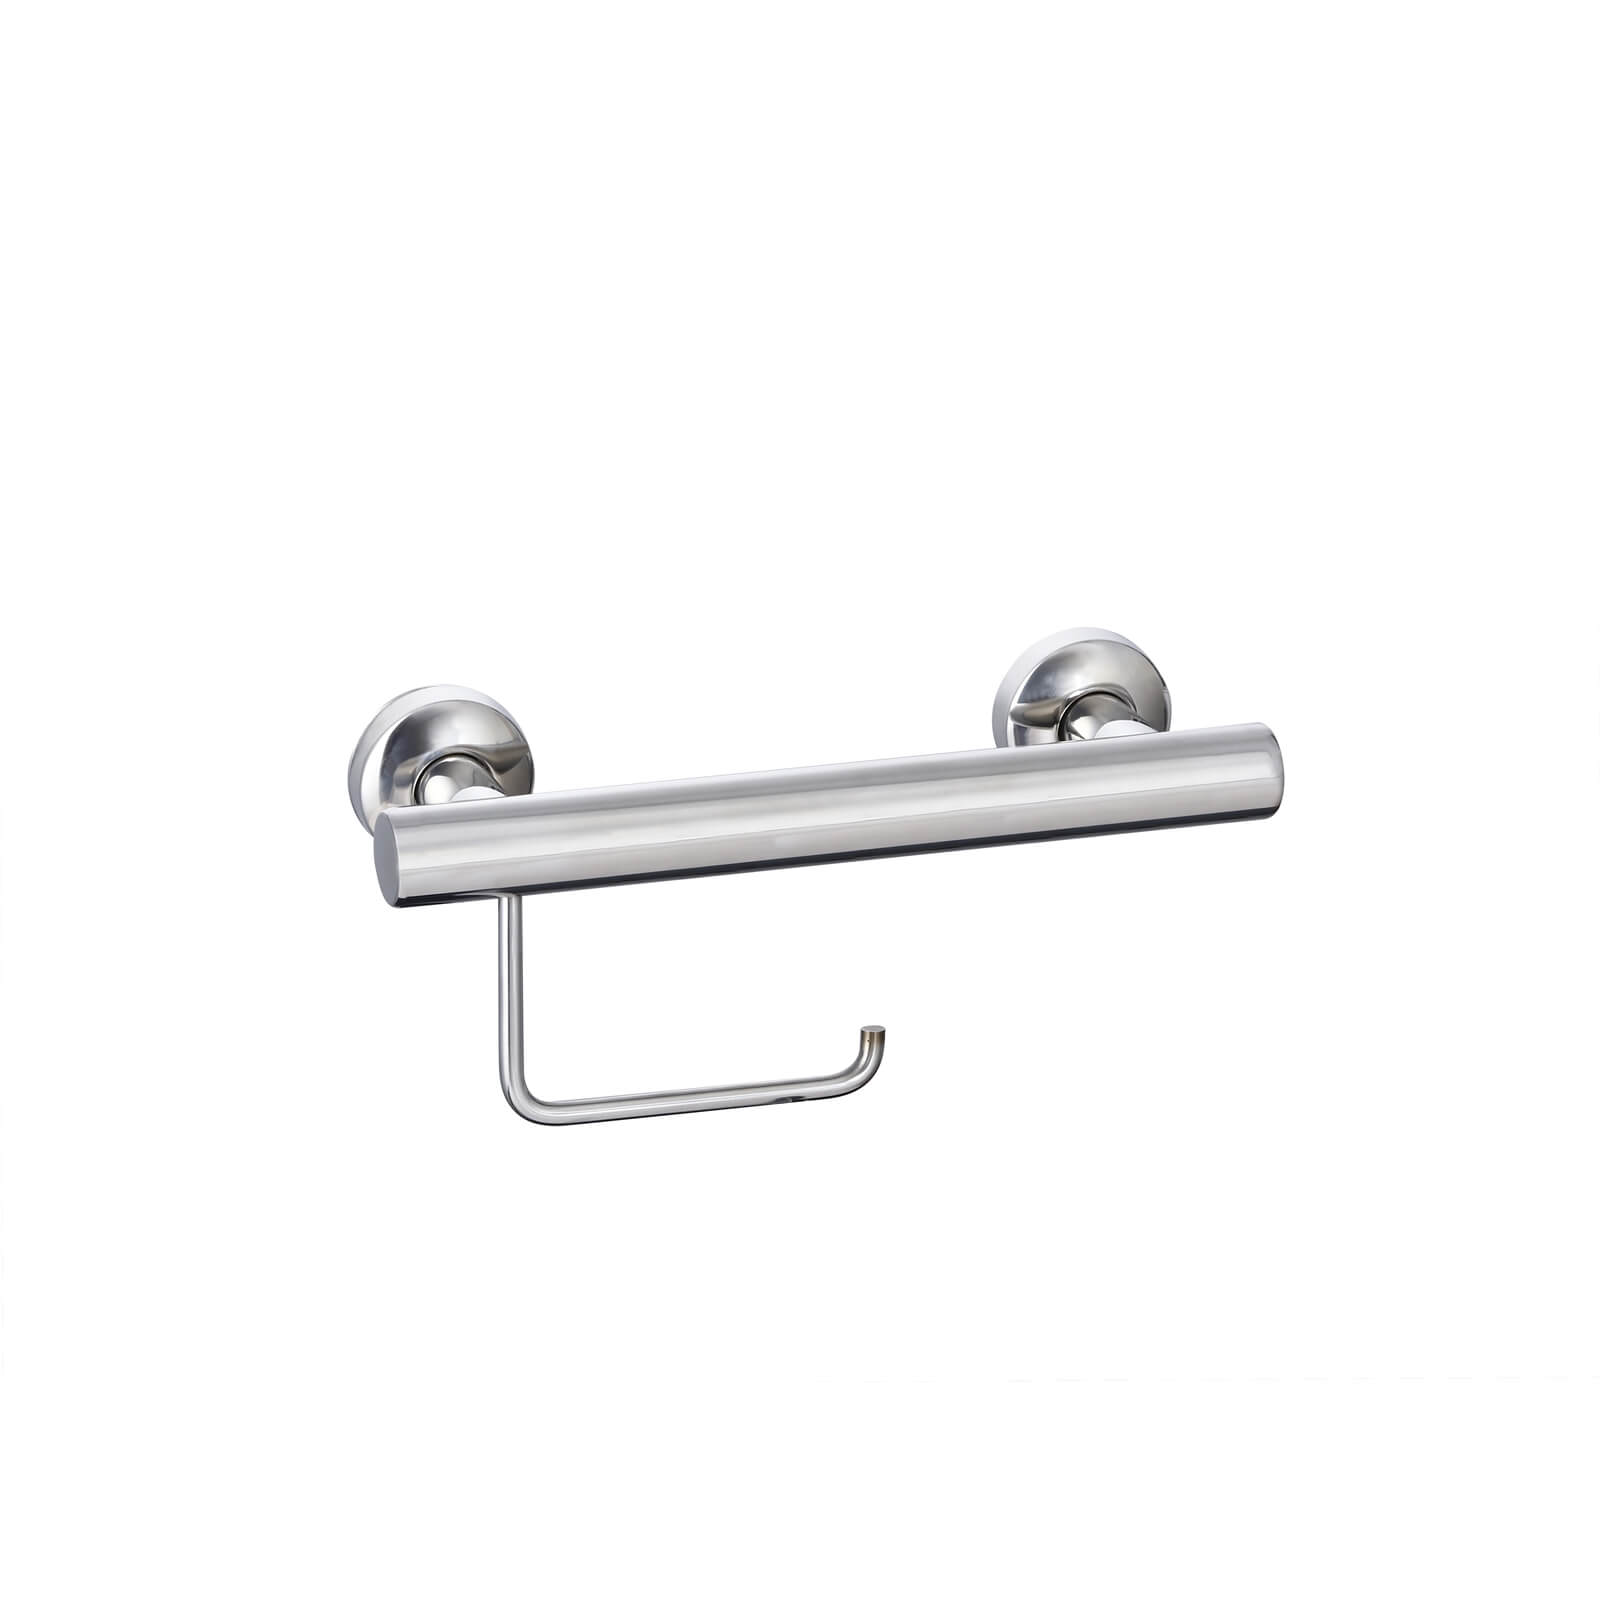 Evacare Toilet Roll Holder and Grab Rail